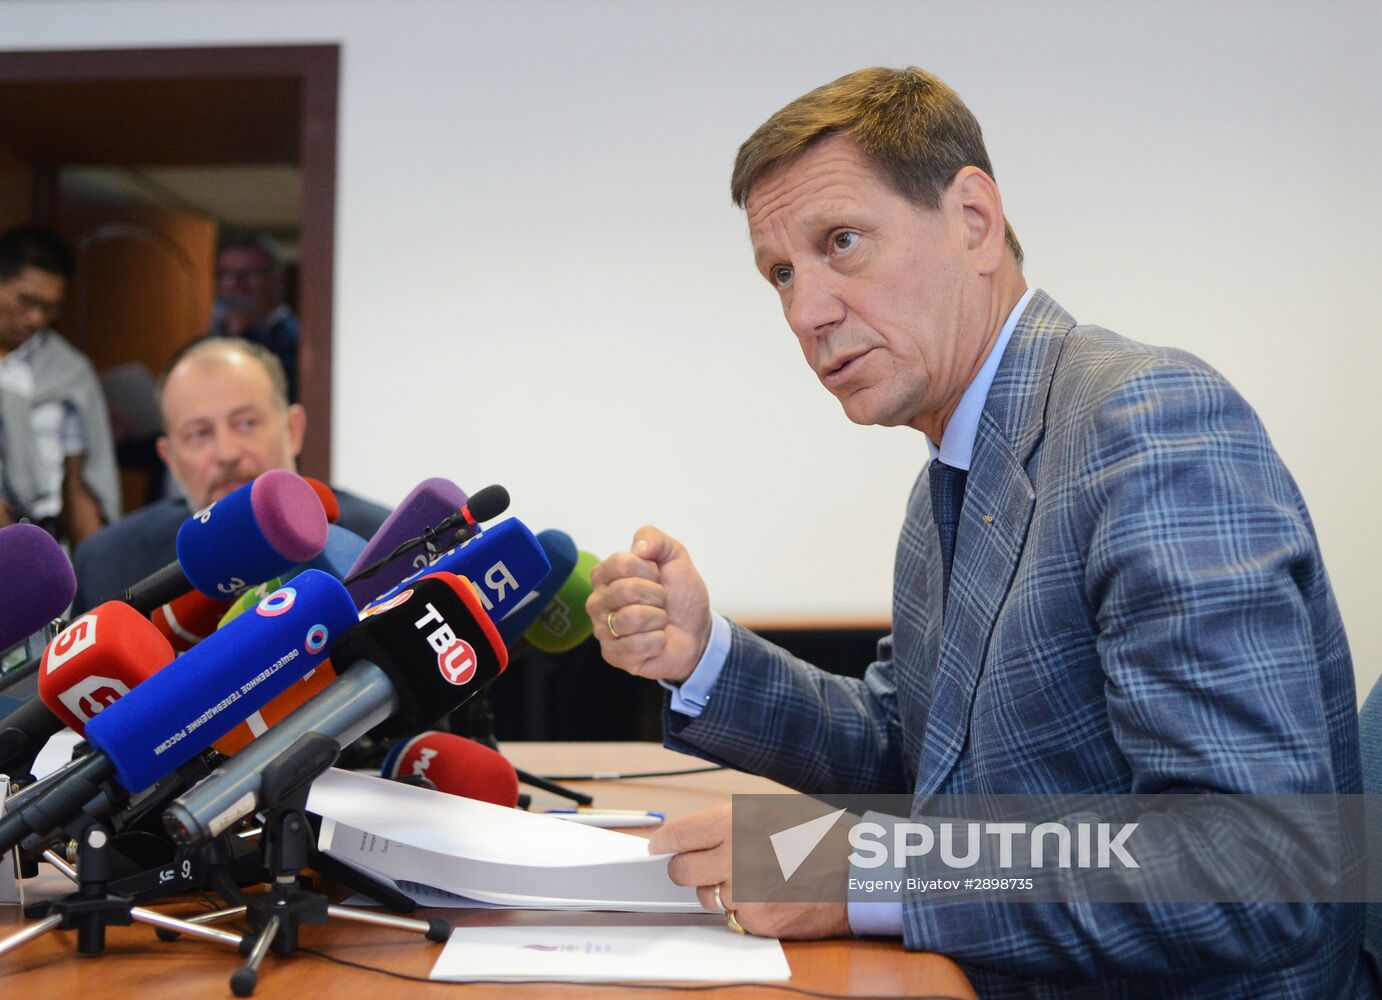 Extraordinary meeting of Executive Committee of Russia's Olympic Committee